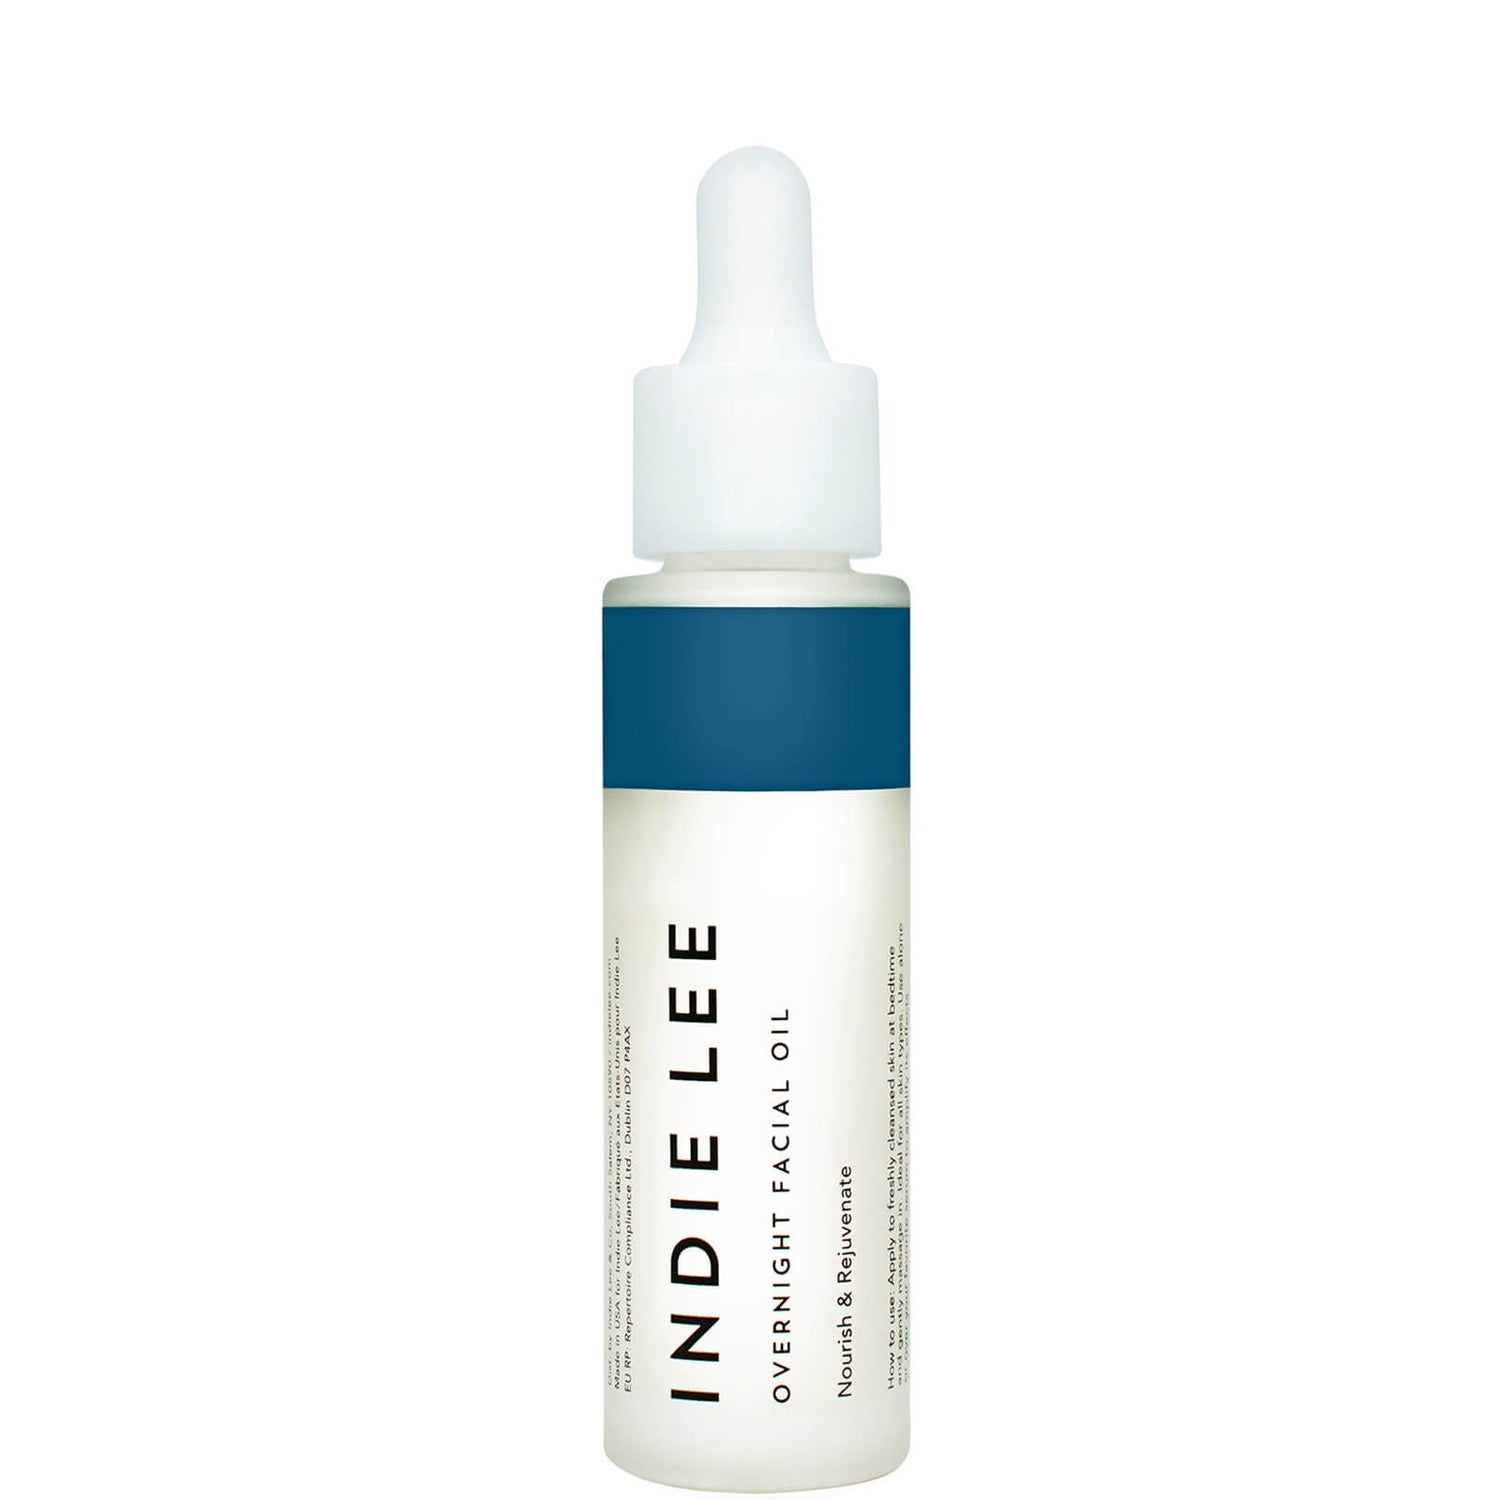 Indie Lee Overnight Facial Oil 1 fl. oz.